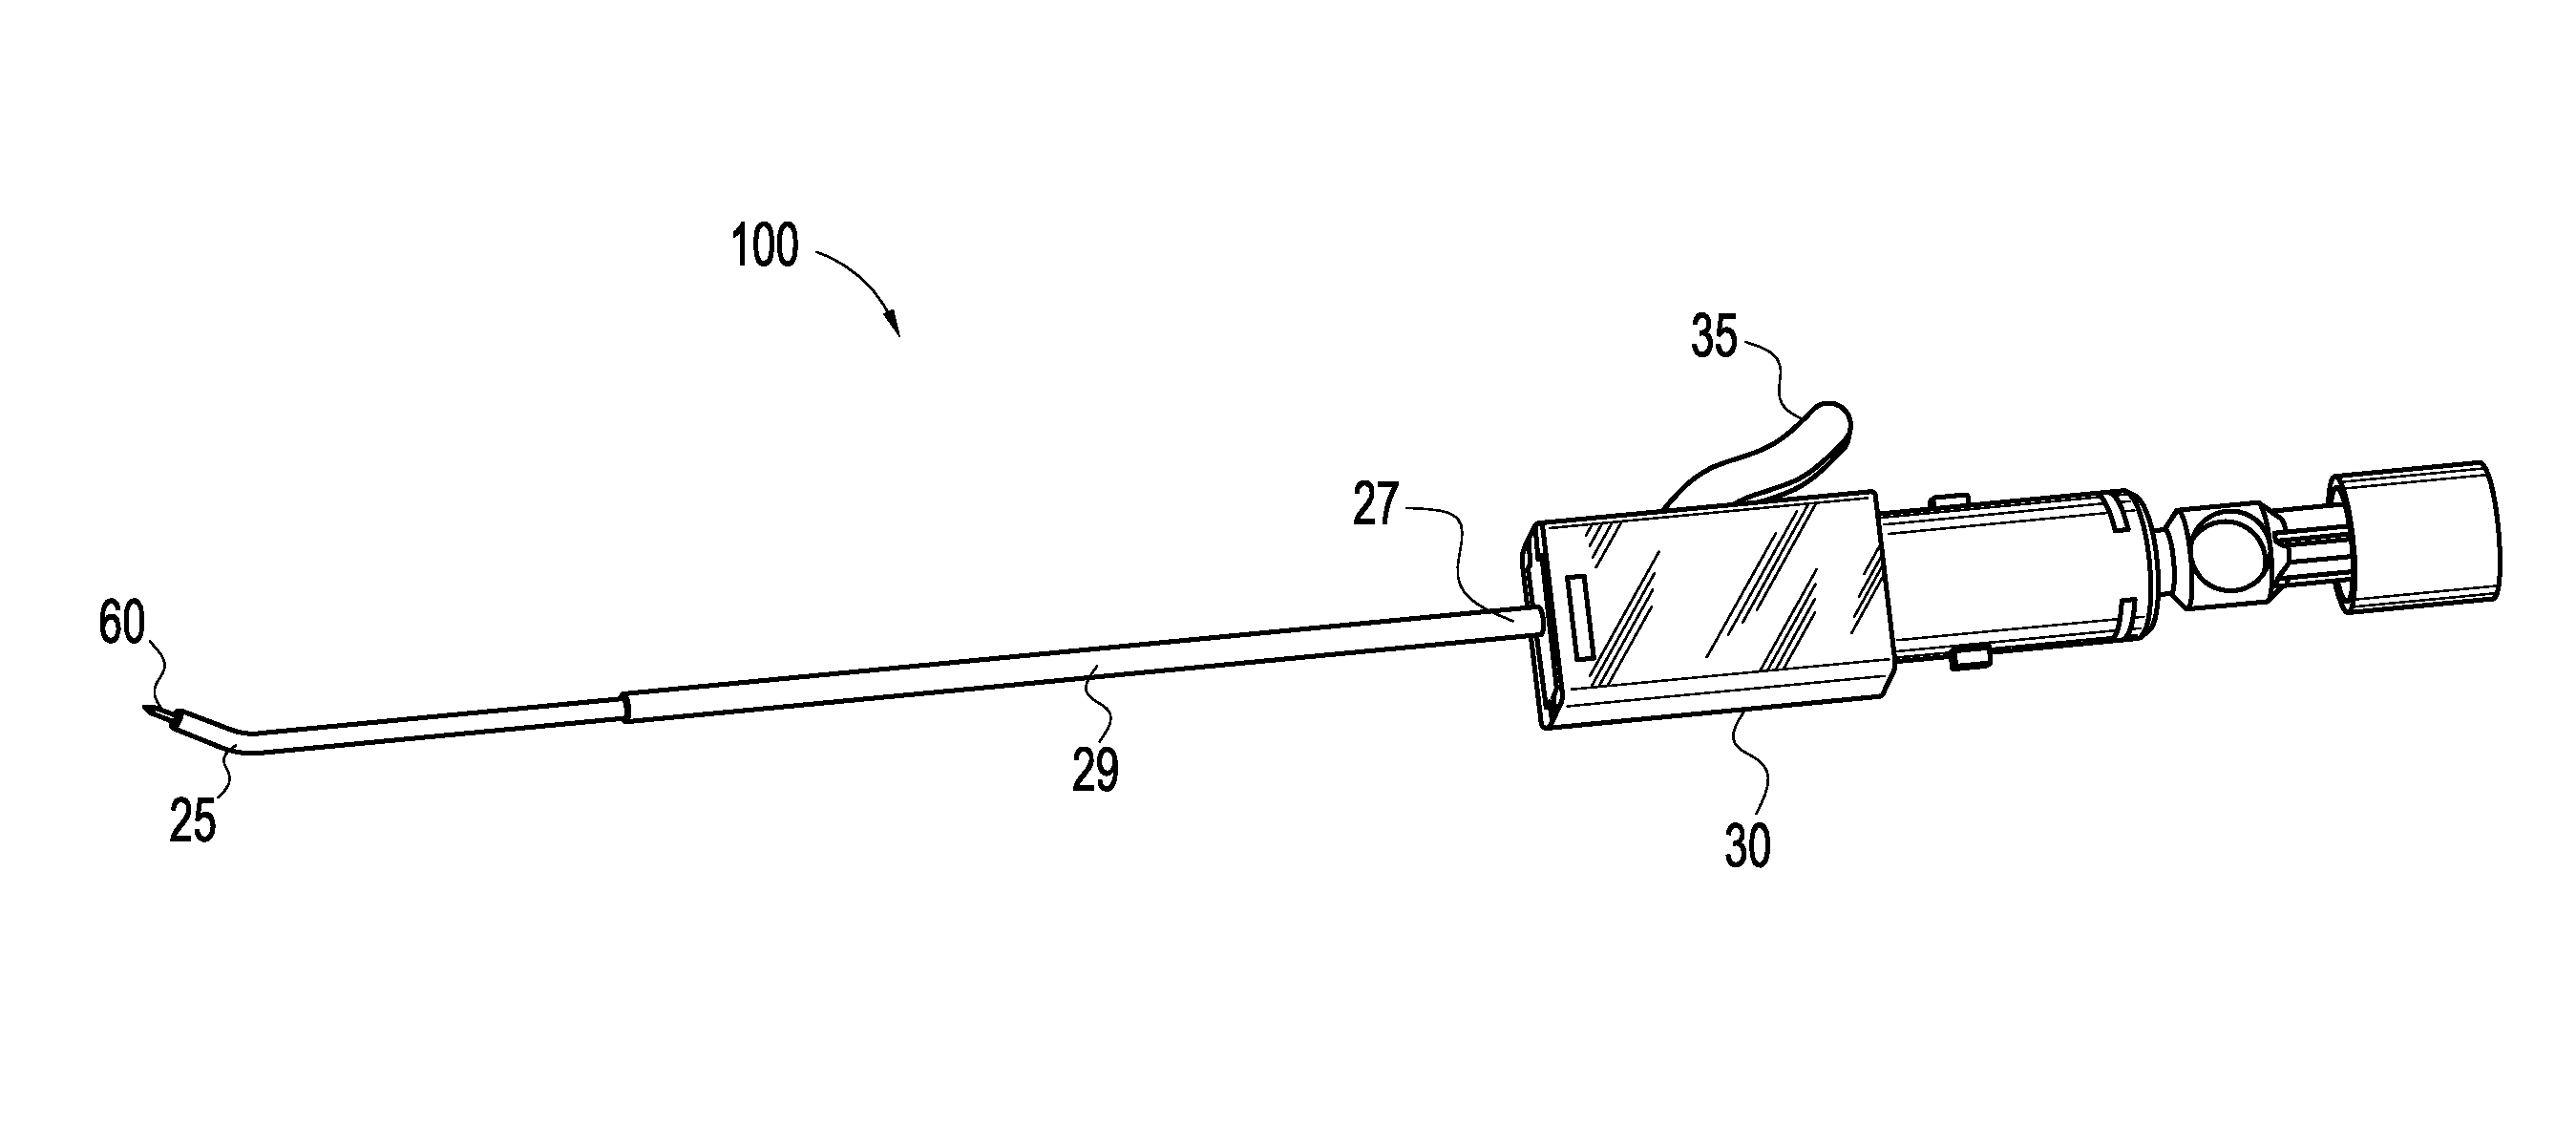 Microfracture instrument